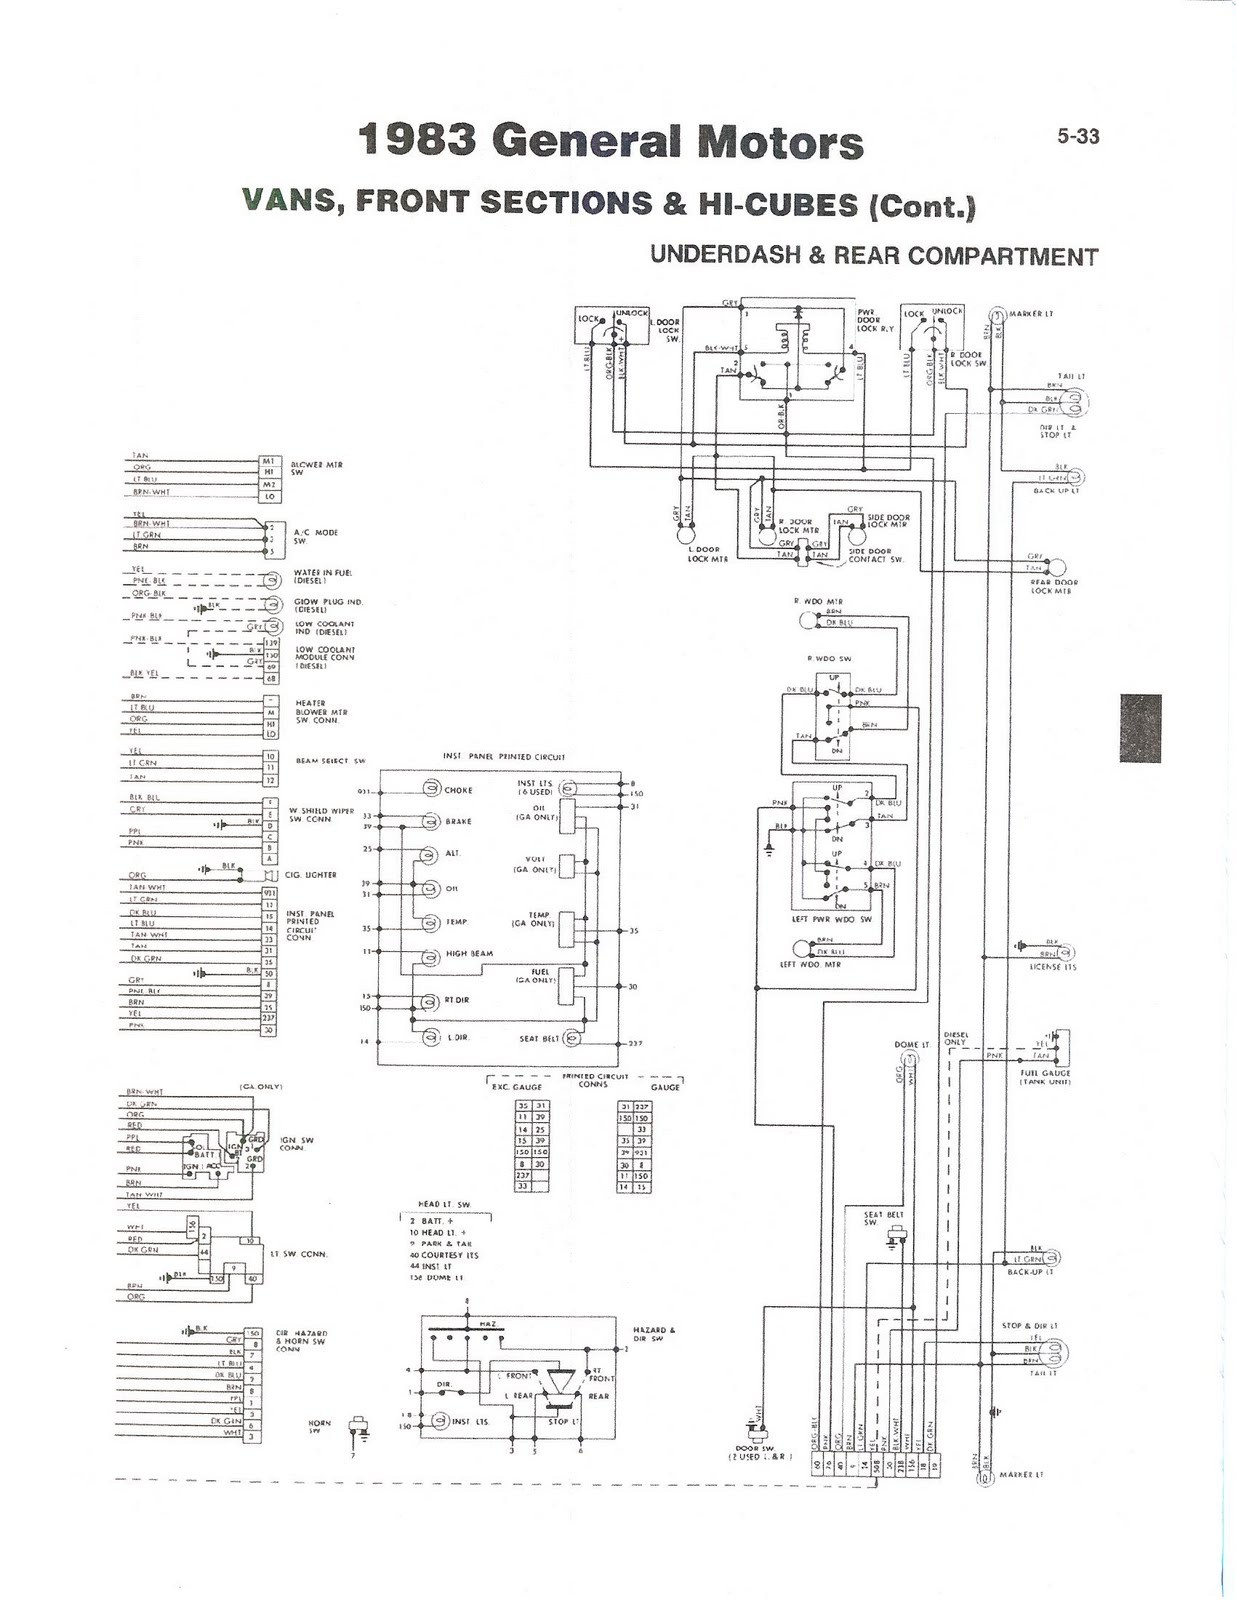 Fleetwood Motorhome Wiring Diagram Fuse from mainetreasurechest.com